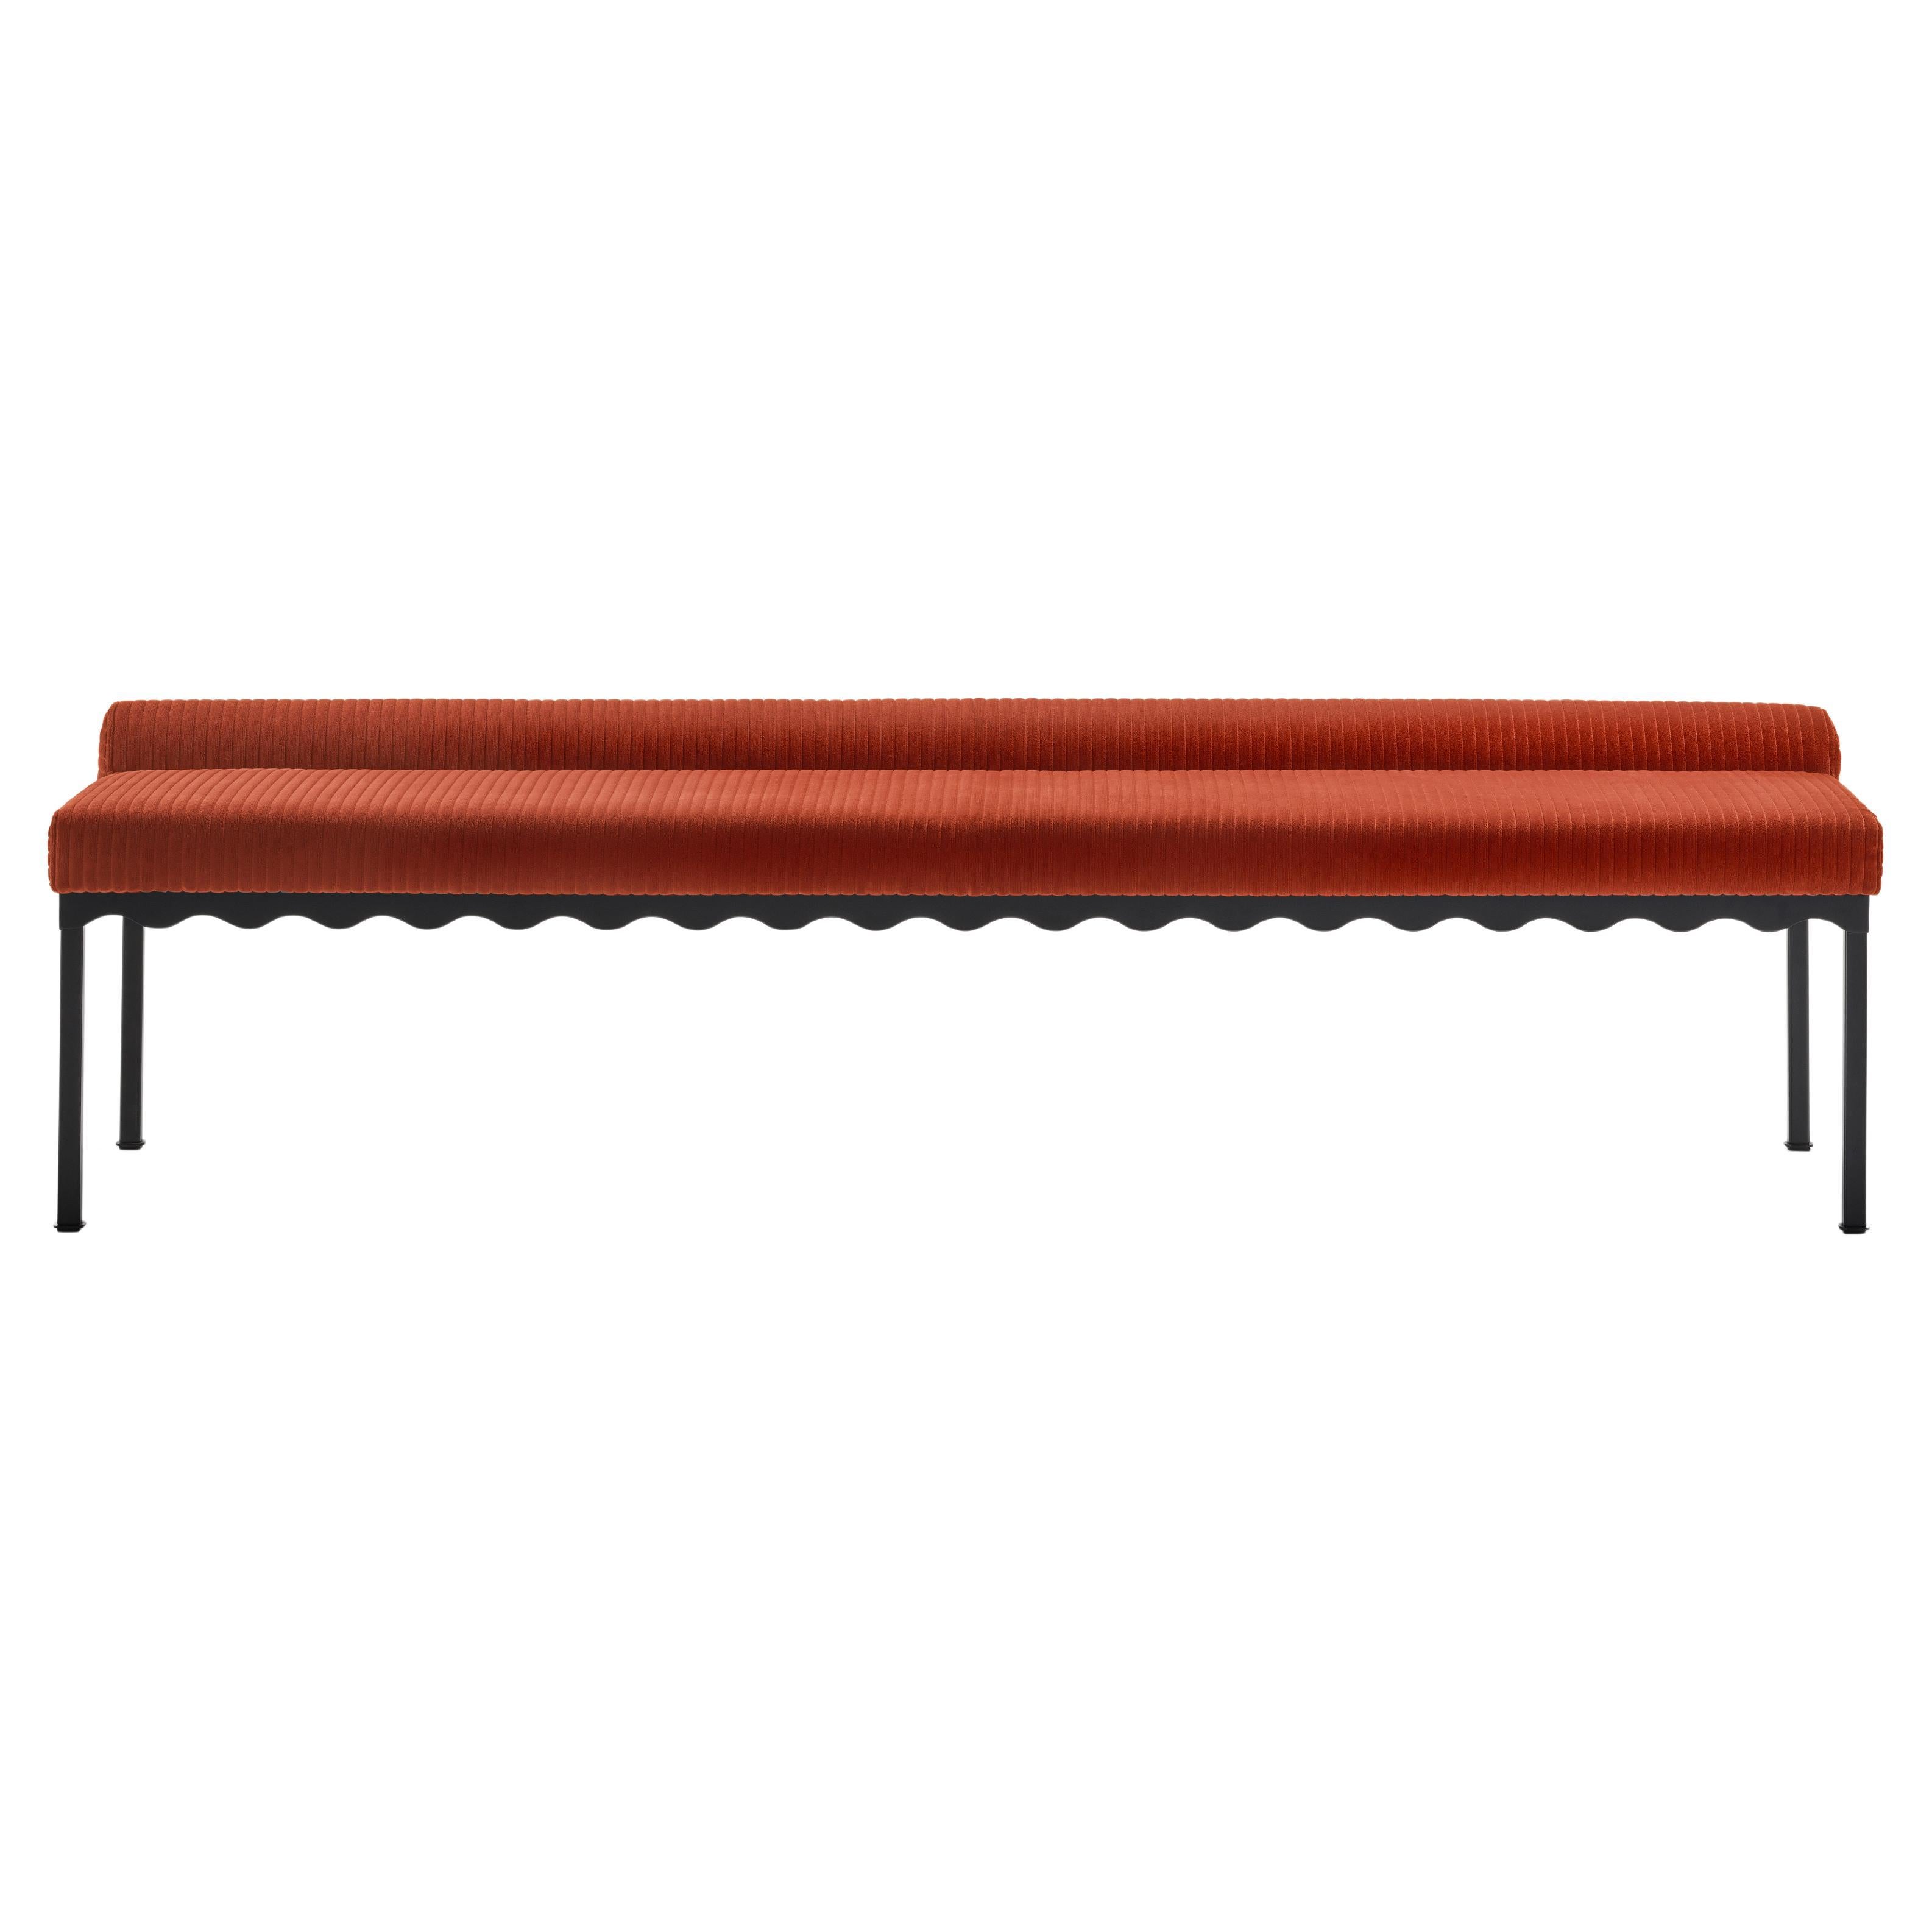 Sanguine Bellini 2040 Bench by Coco Flip For Sale